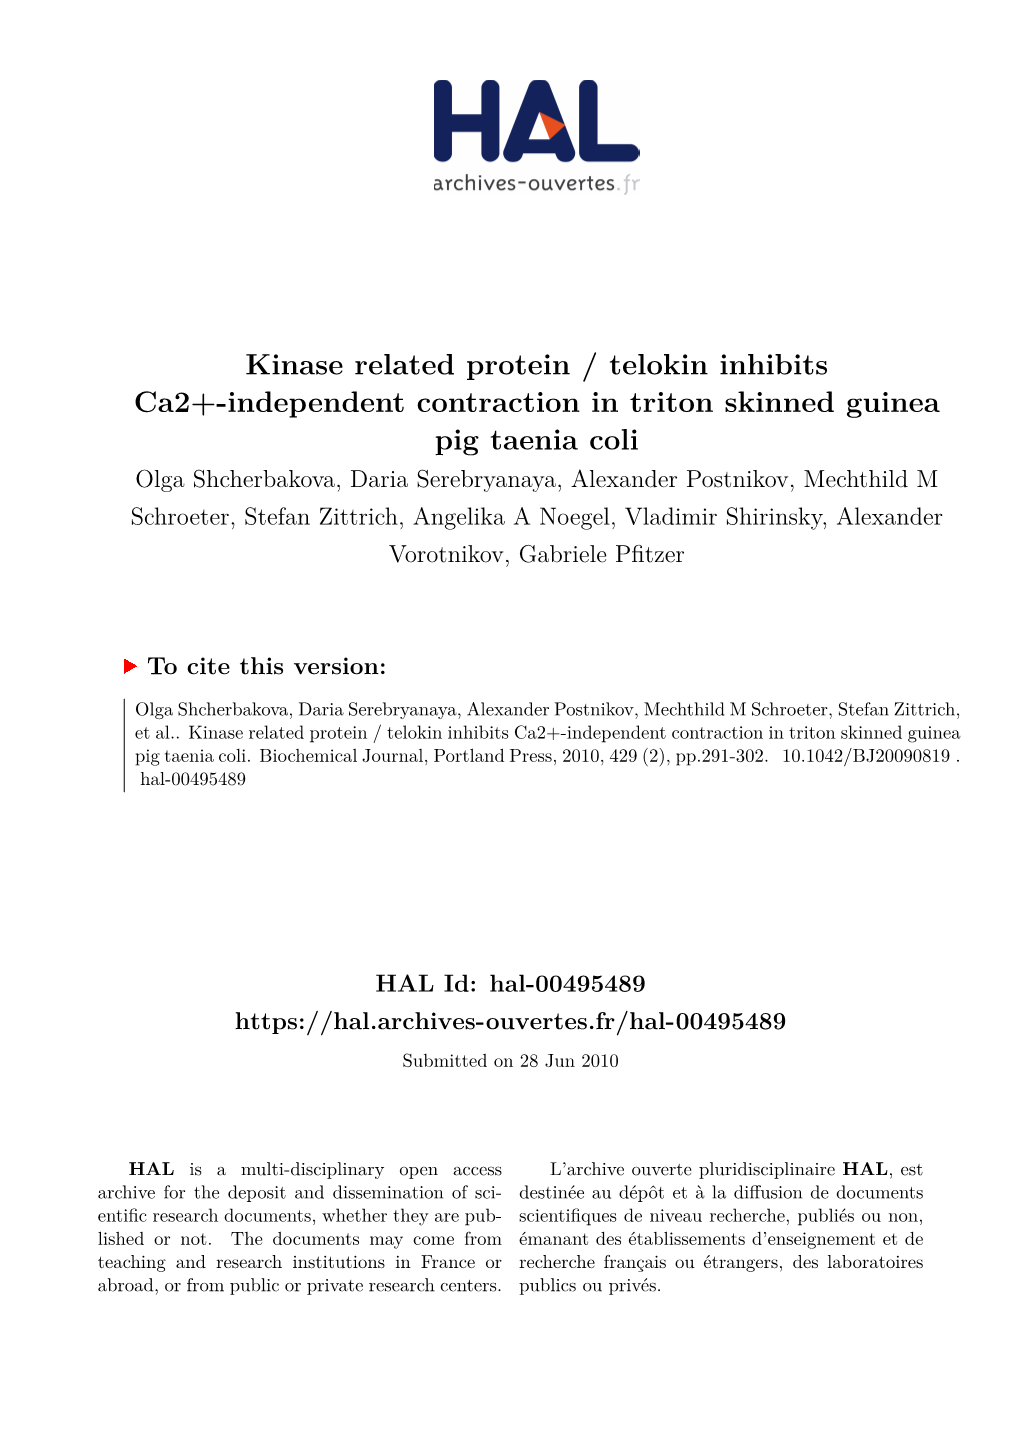 Kinase Related Protein / Telokin Inhibits Ca2+-Independent Contraction in Triton Skinned Guinea Pig Taenia Coli